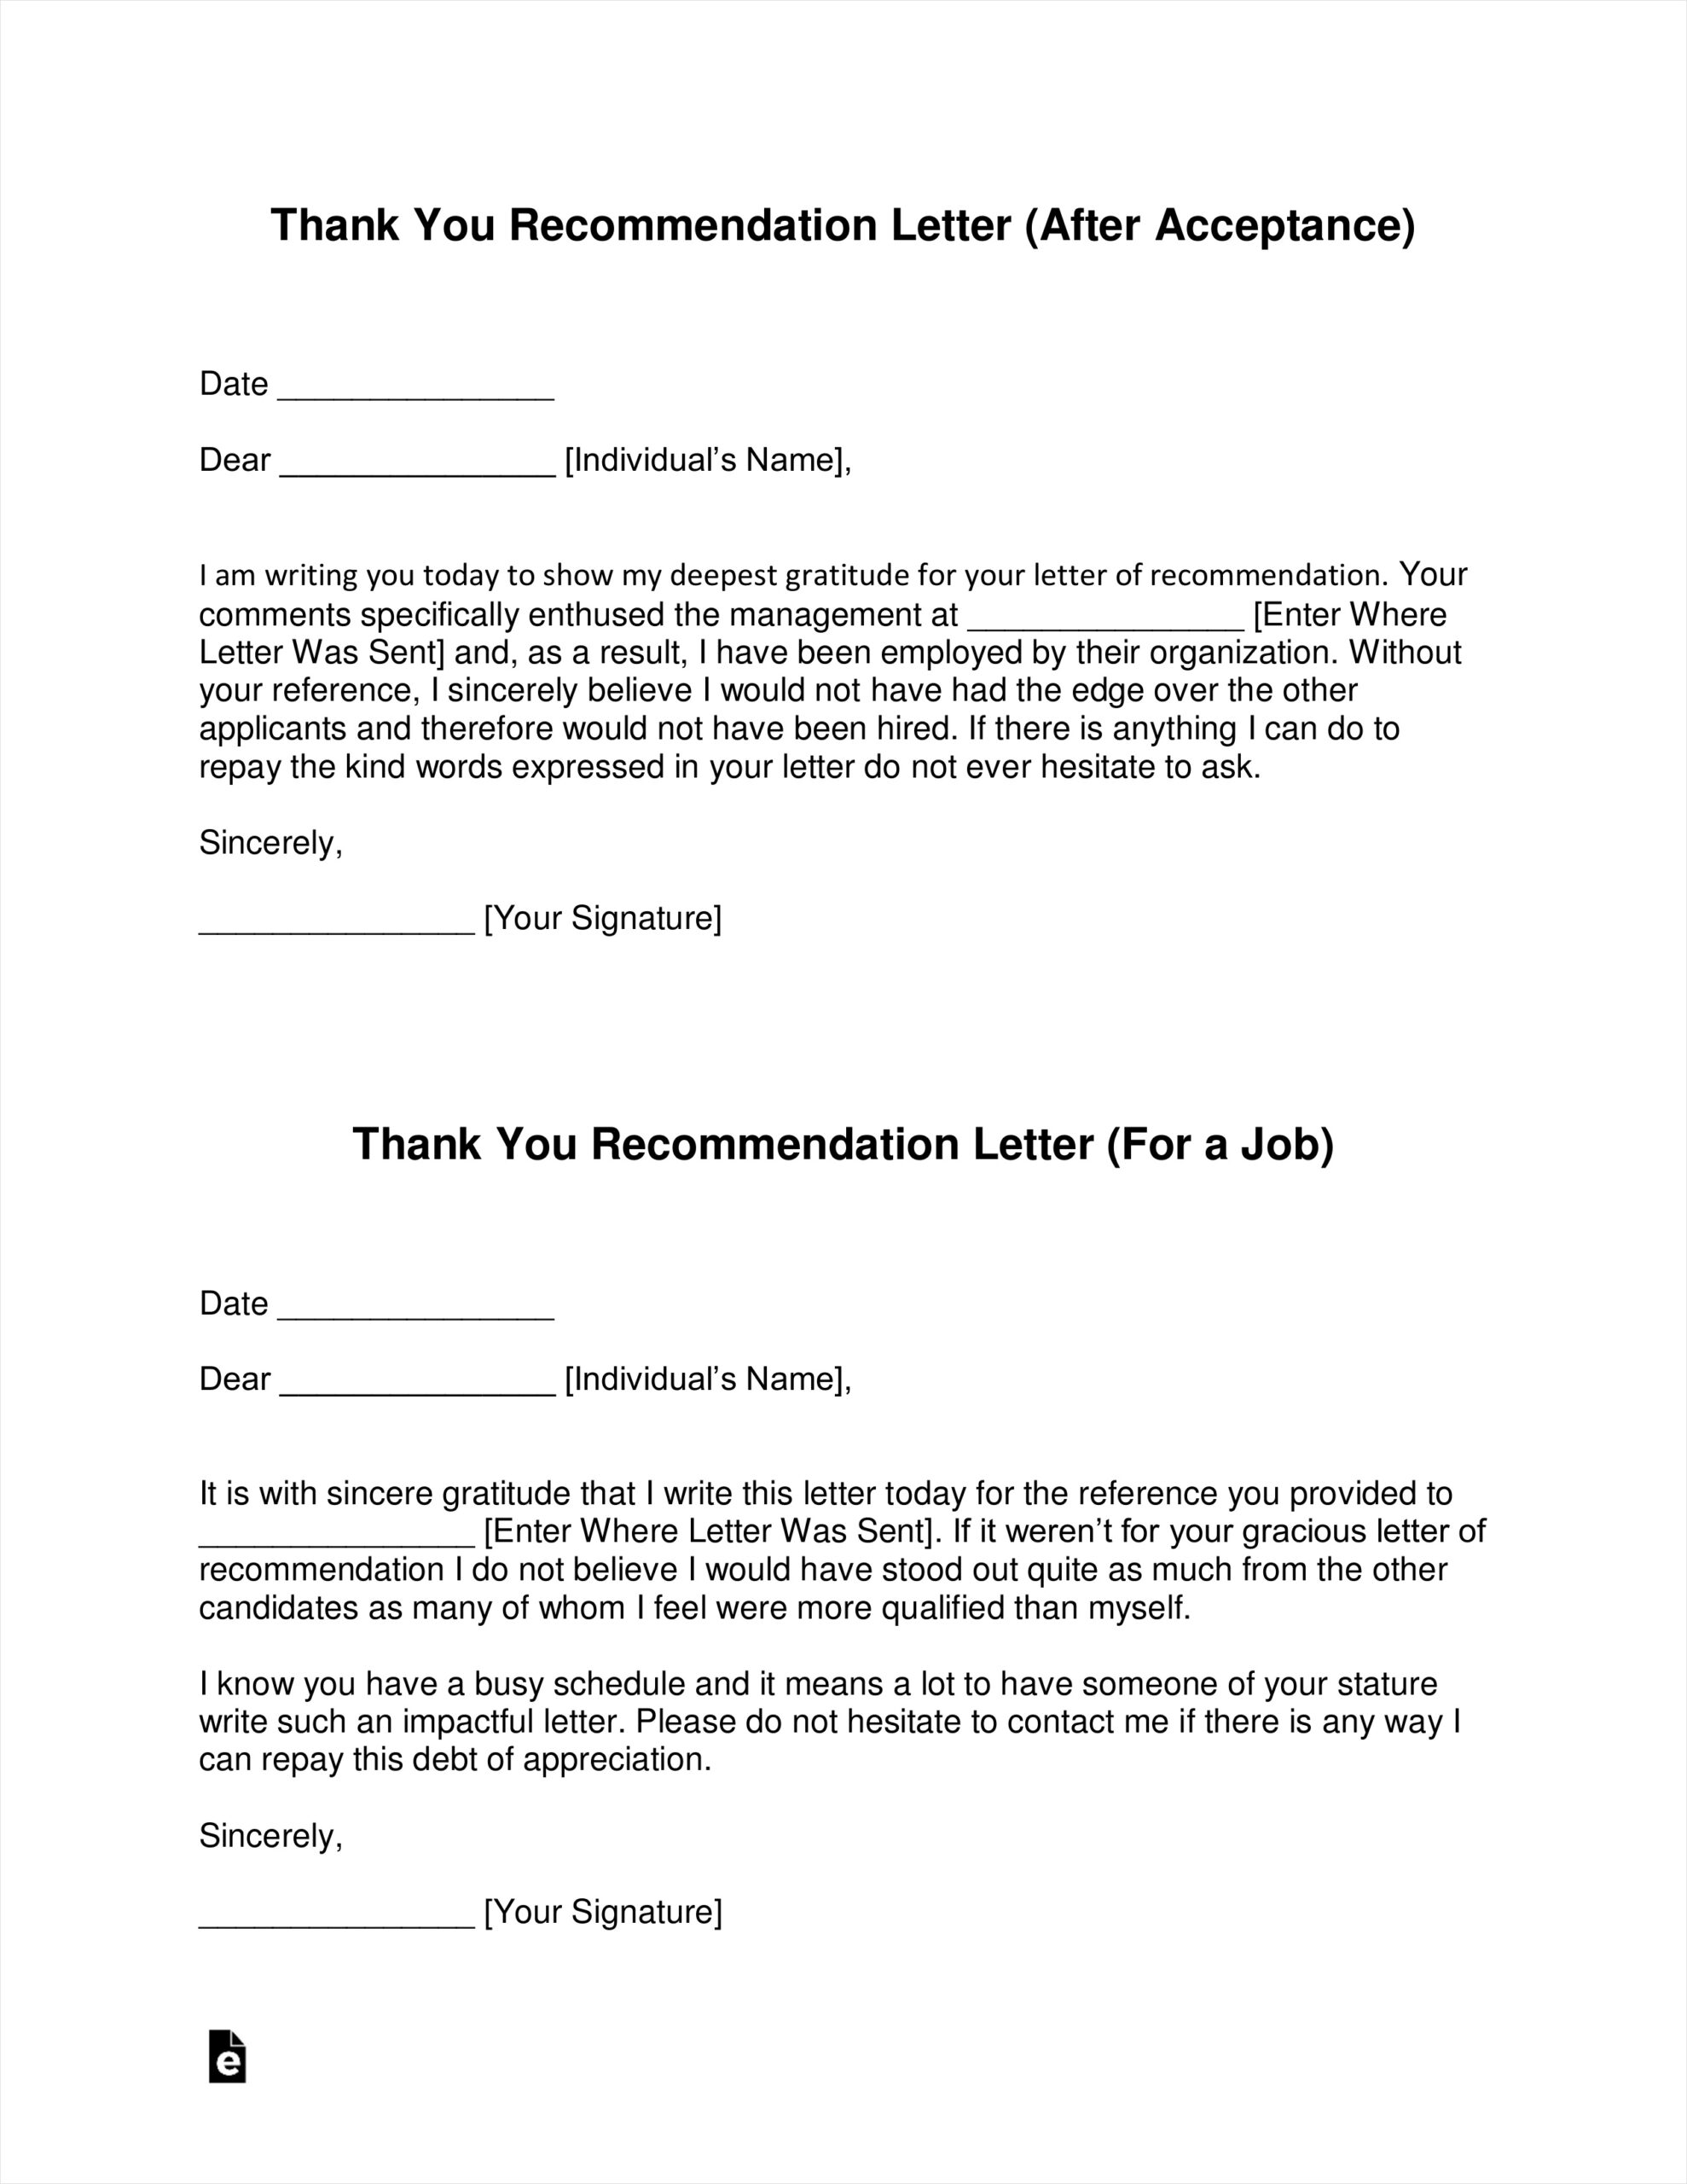 thank you letter template for writing recommendation